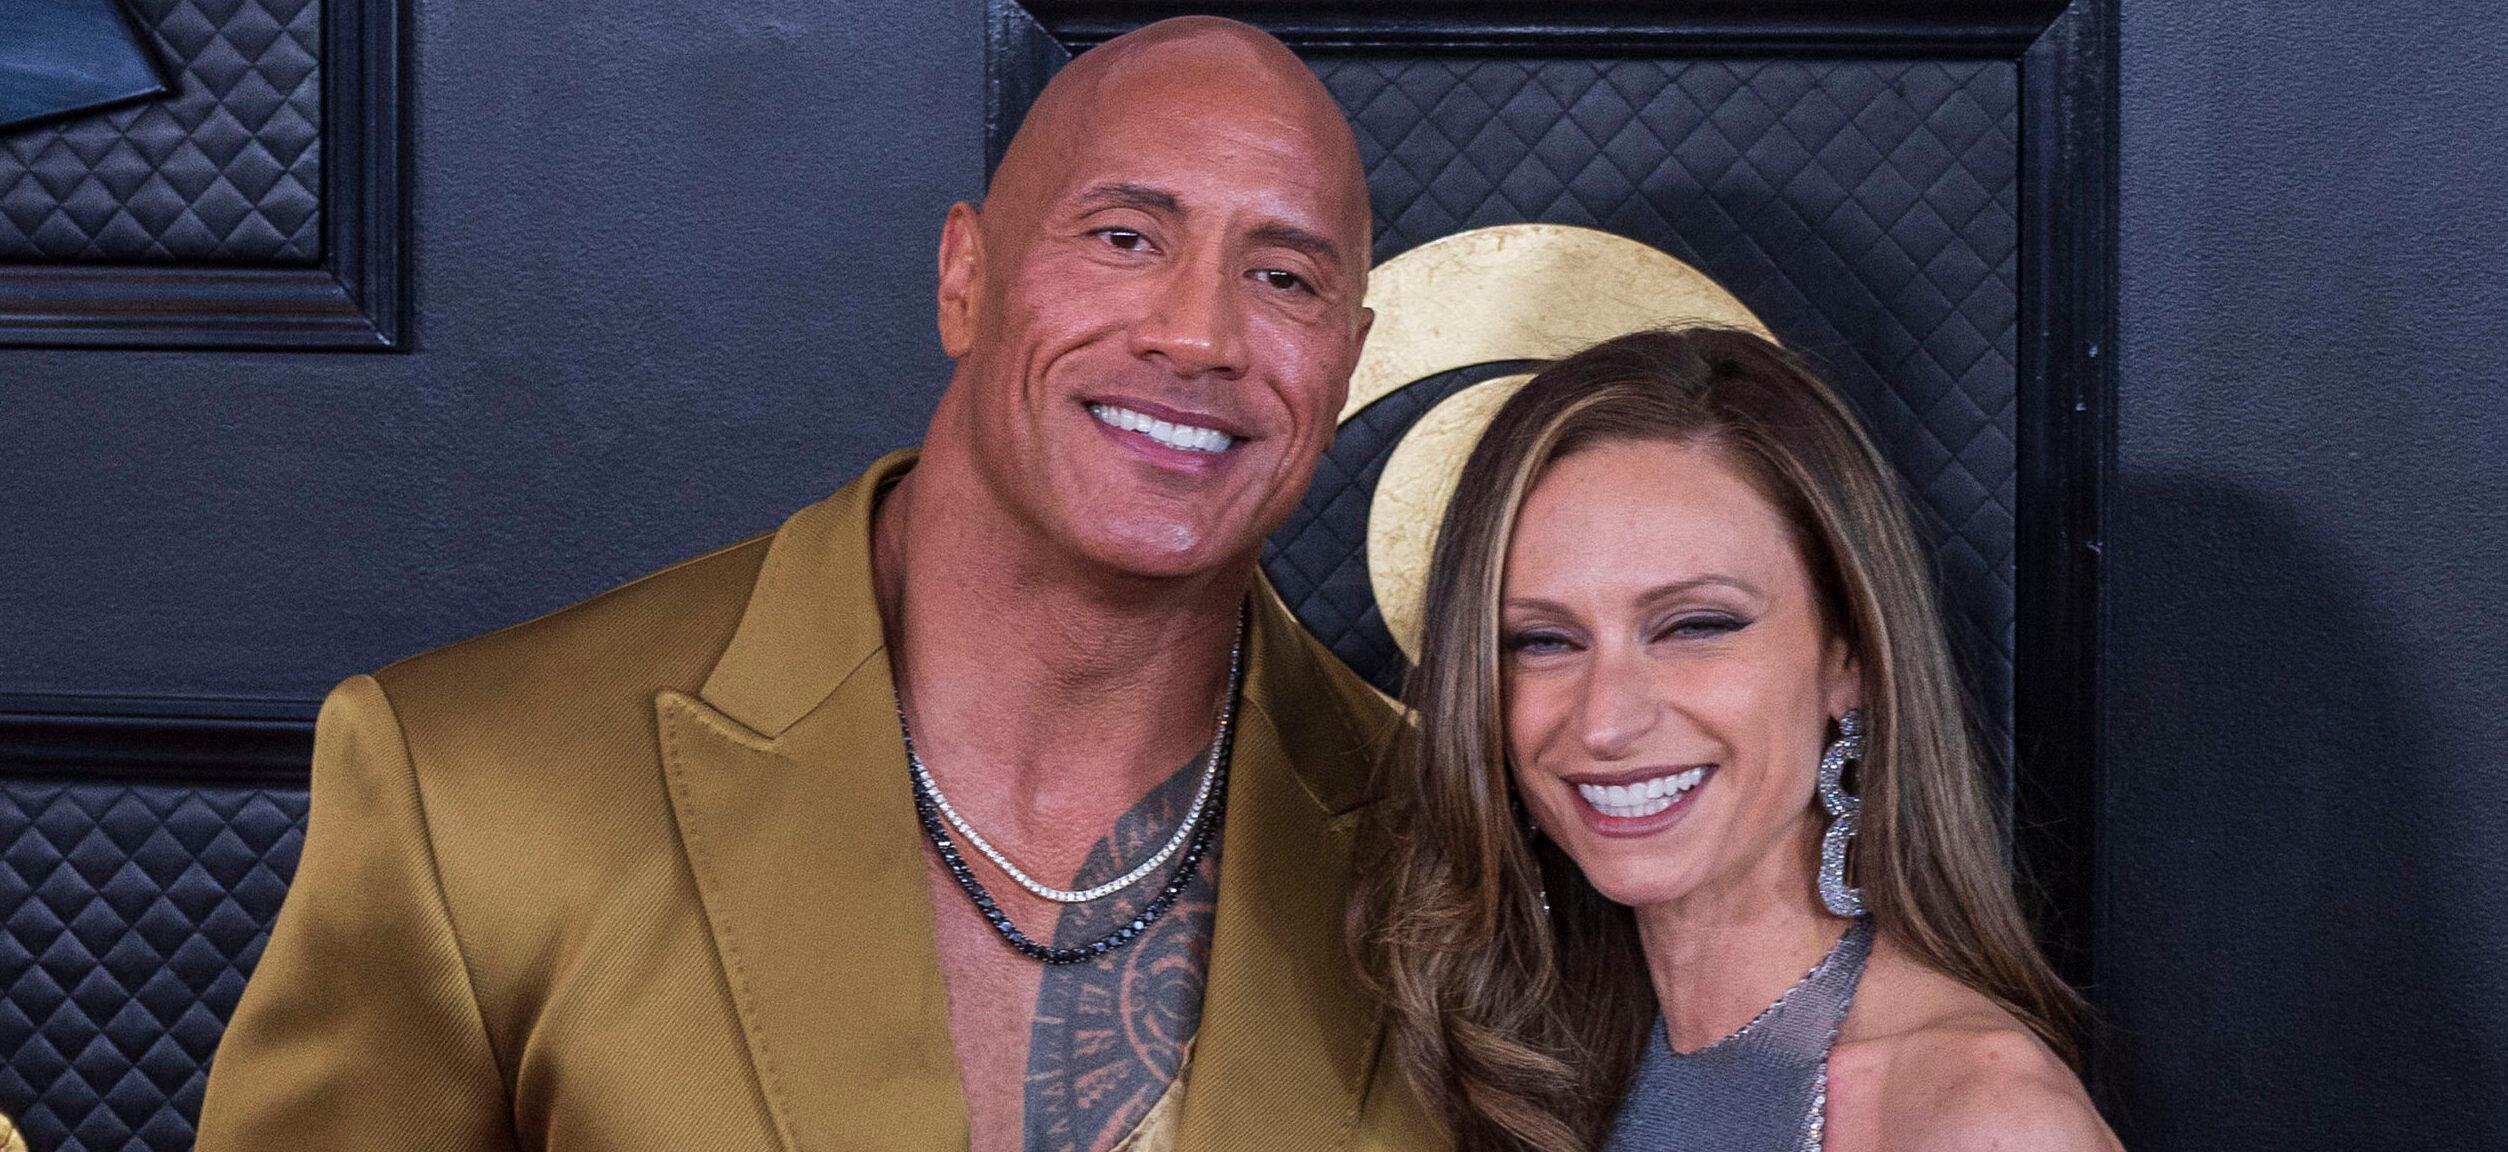 Dwayne Johnson and Lauren Hashian on the red carpet of the 65th Annual Grammy Awards held on Sunday February 5, 2023 at Crypto Arena in Los Angeles, California